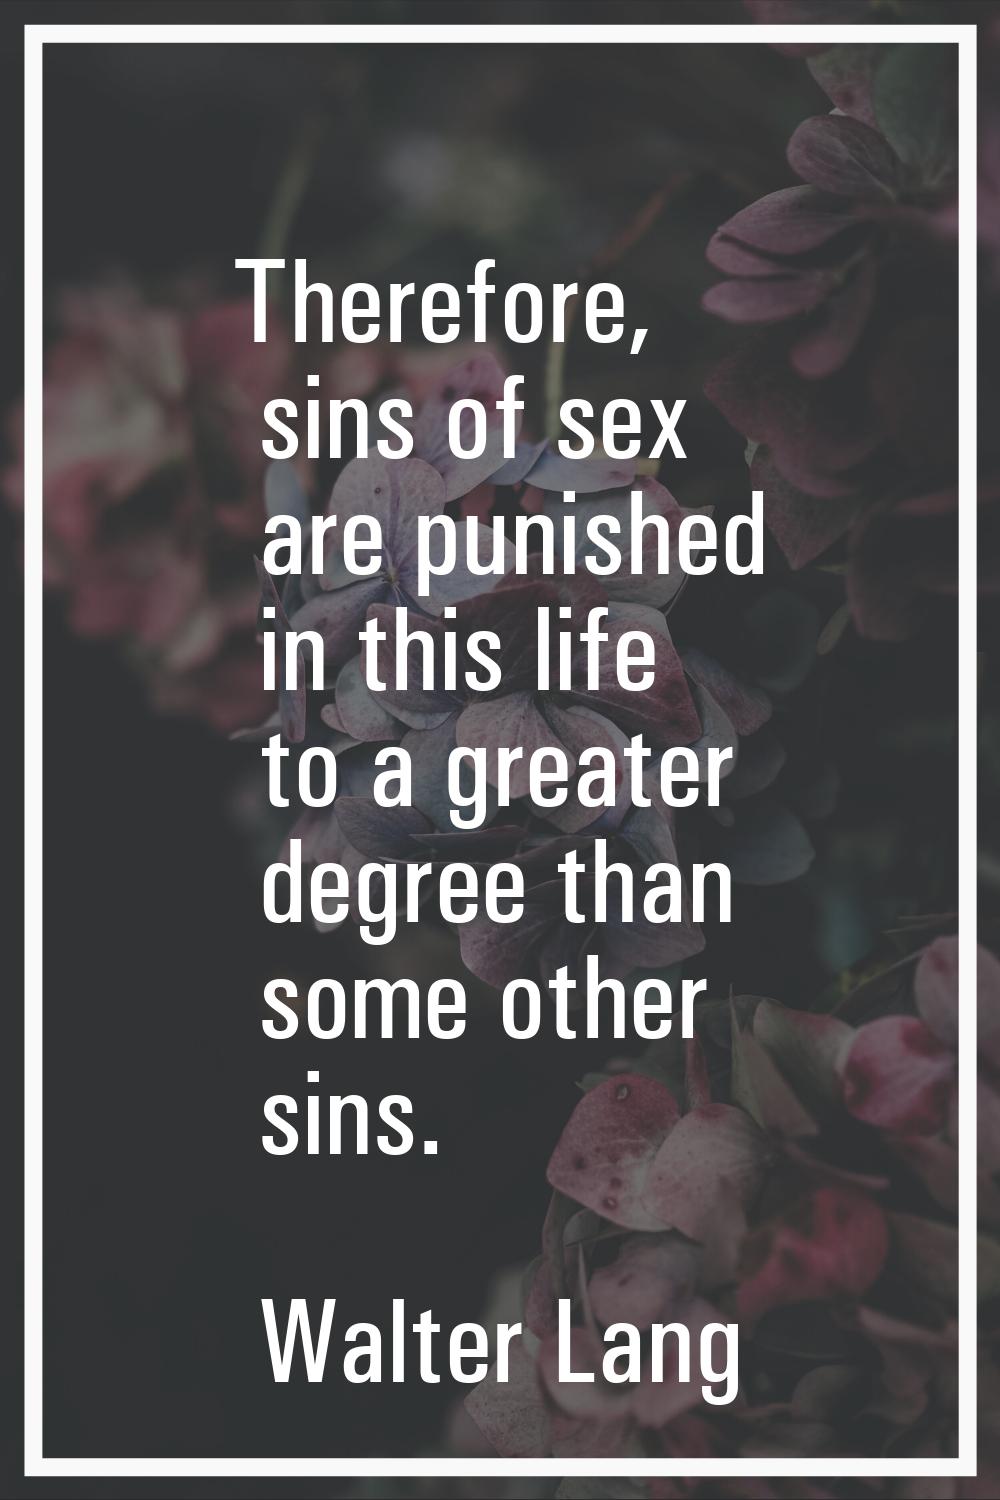 Therefore, sins of sex are punished in this life to a greater degree than some other sins.